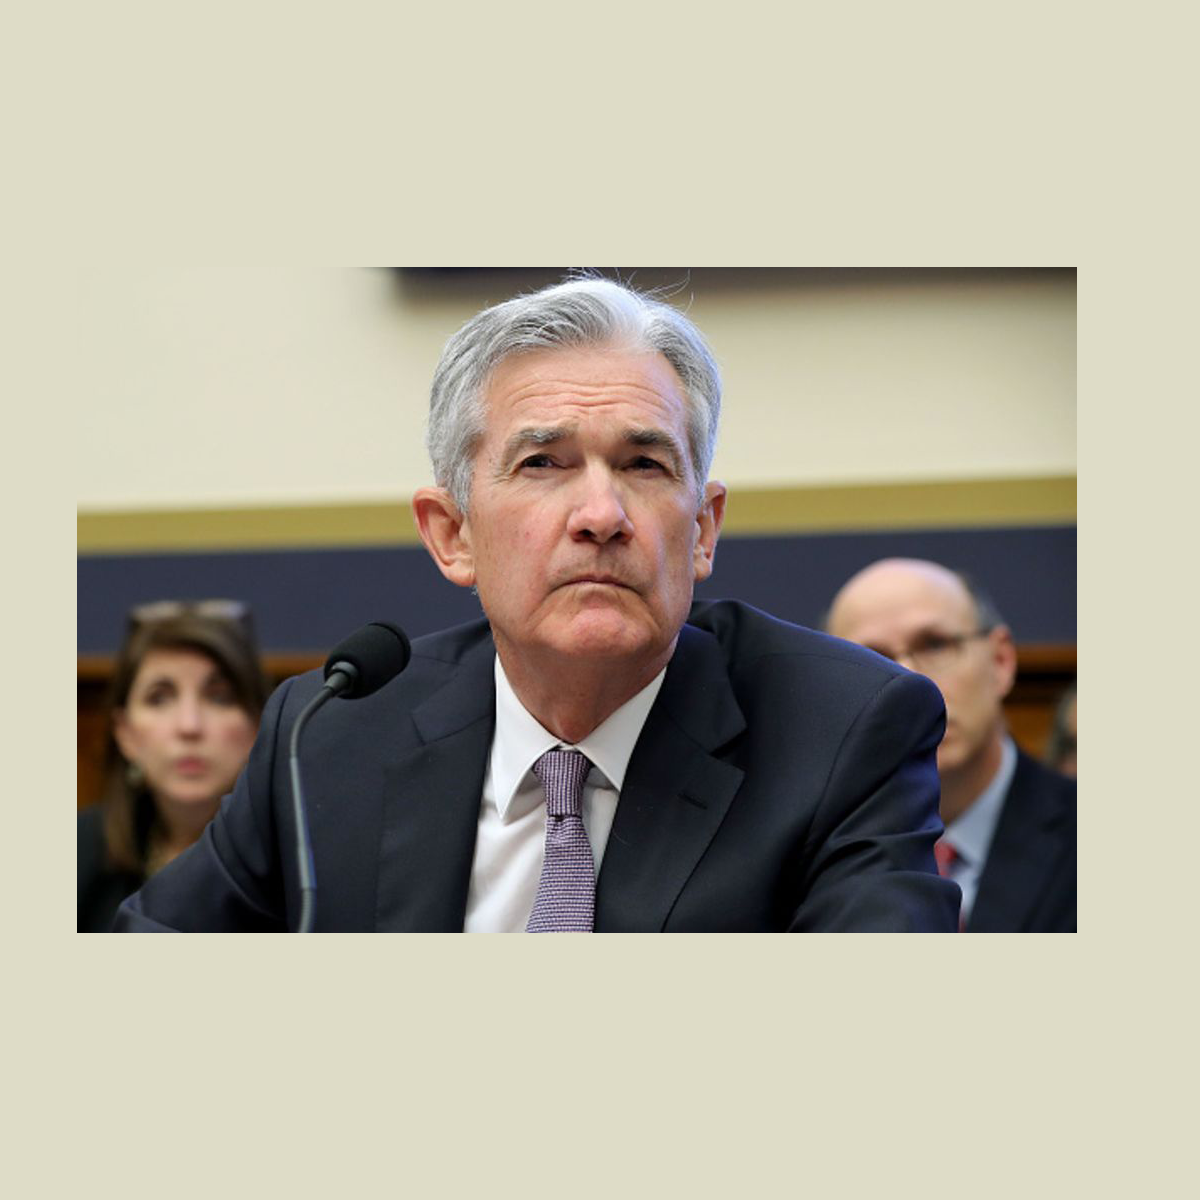 Timeline of the Federal Reserve's trading scandal